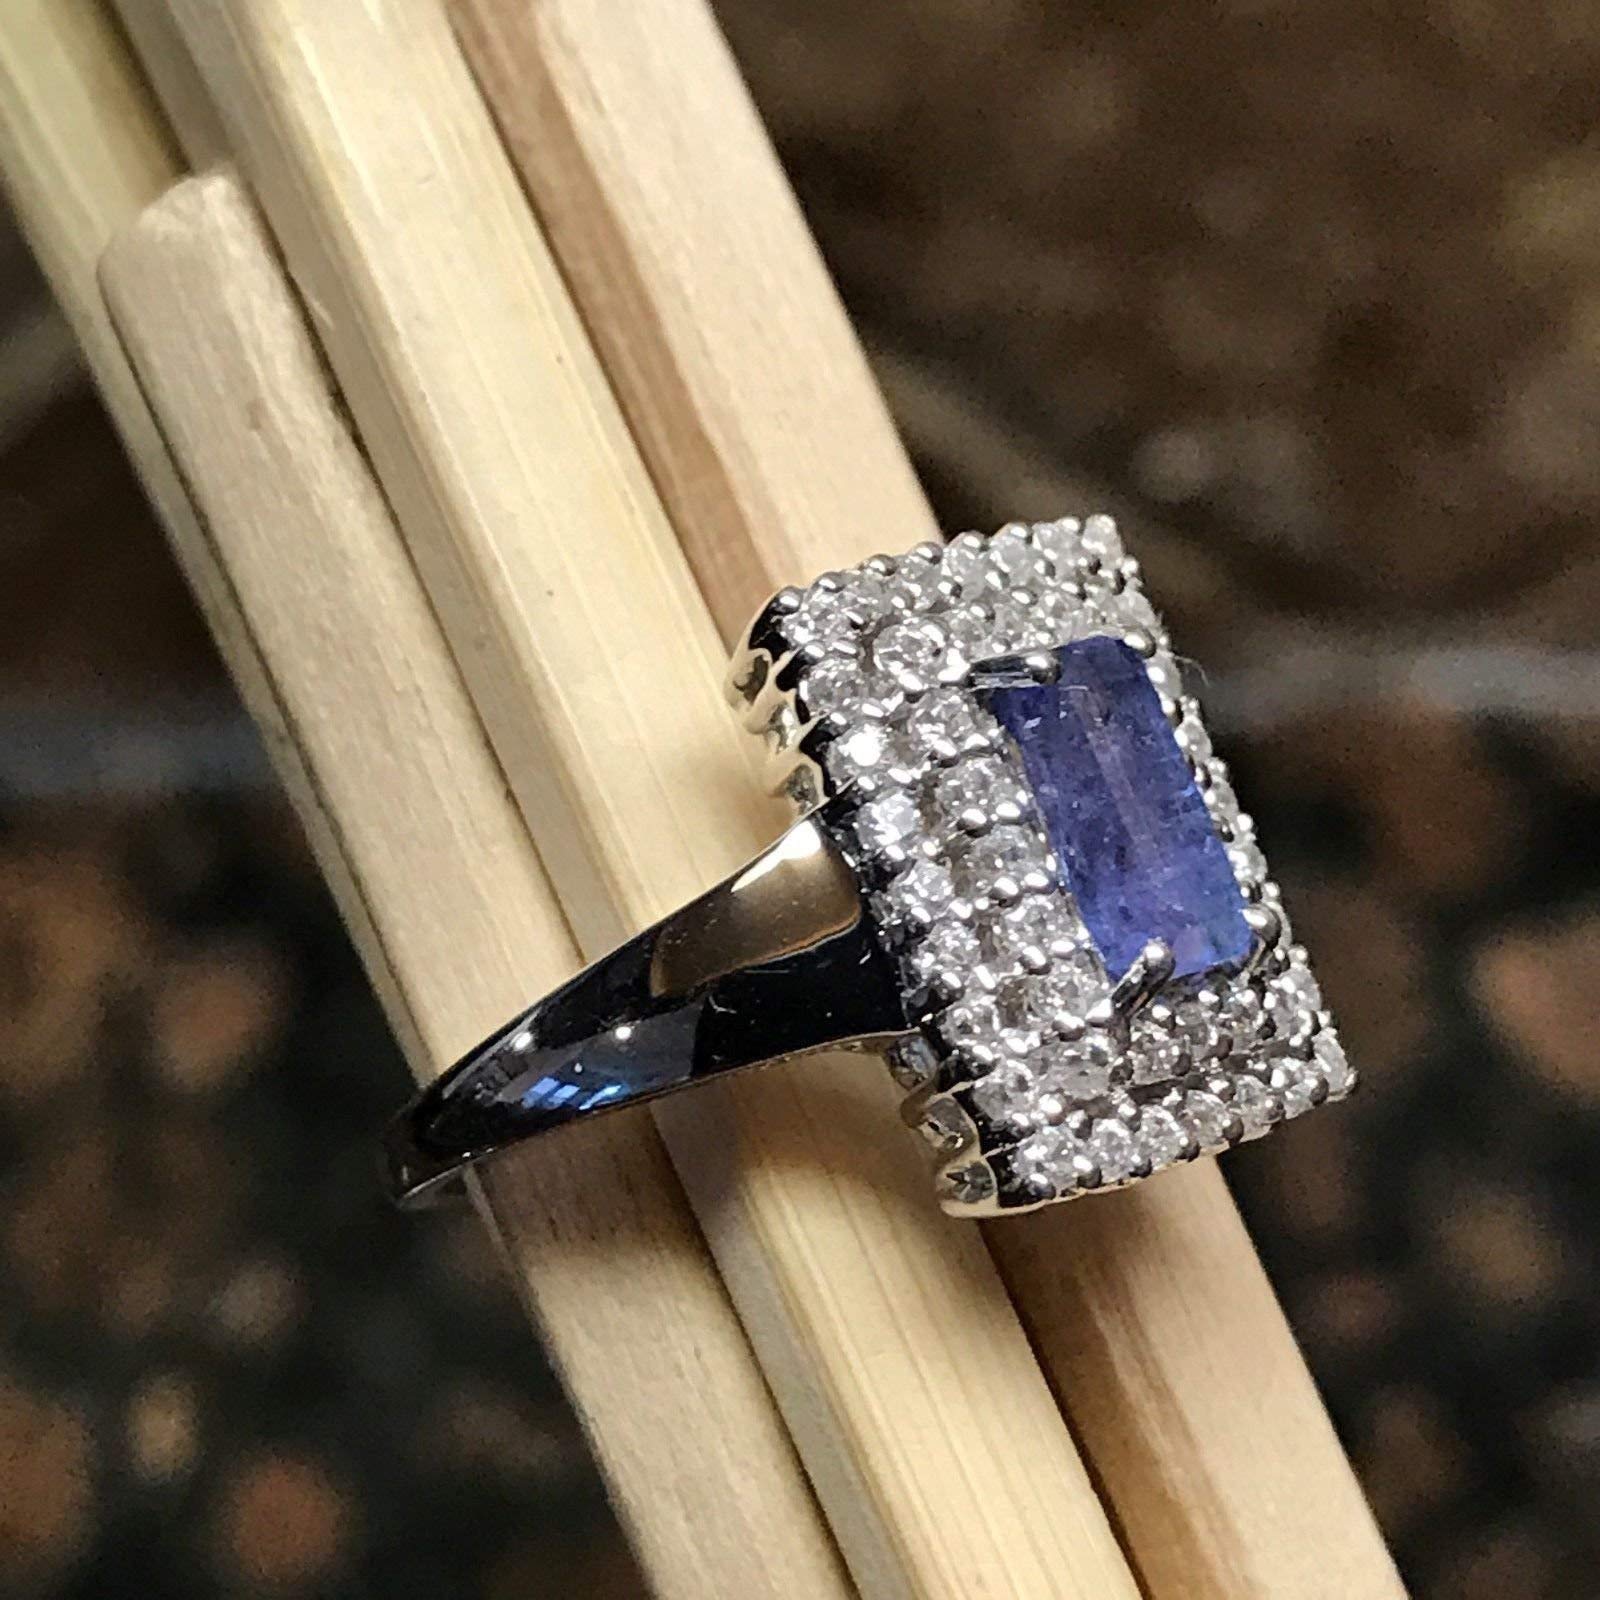 Genuine Tanzanite 925 Solid Sterling Silver Engagement Ring Size 6 - Natural Rocks by Kala